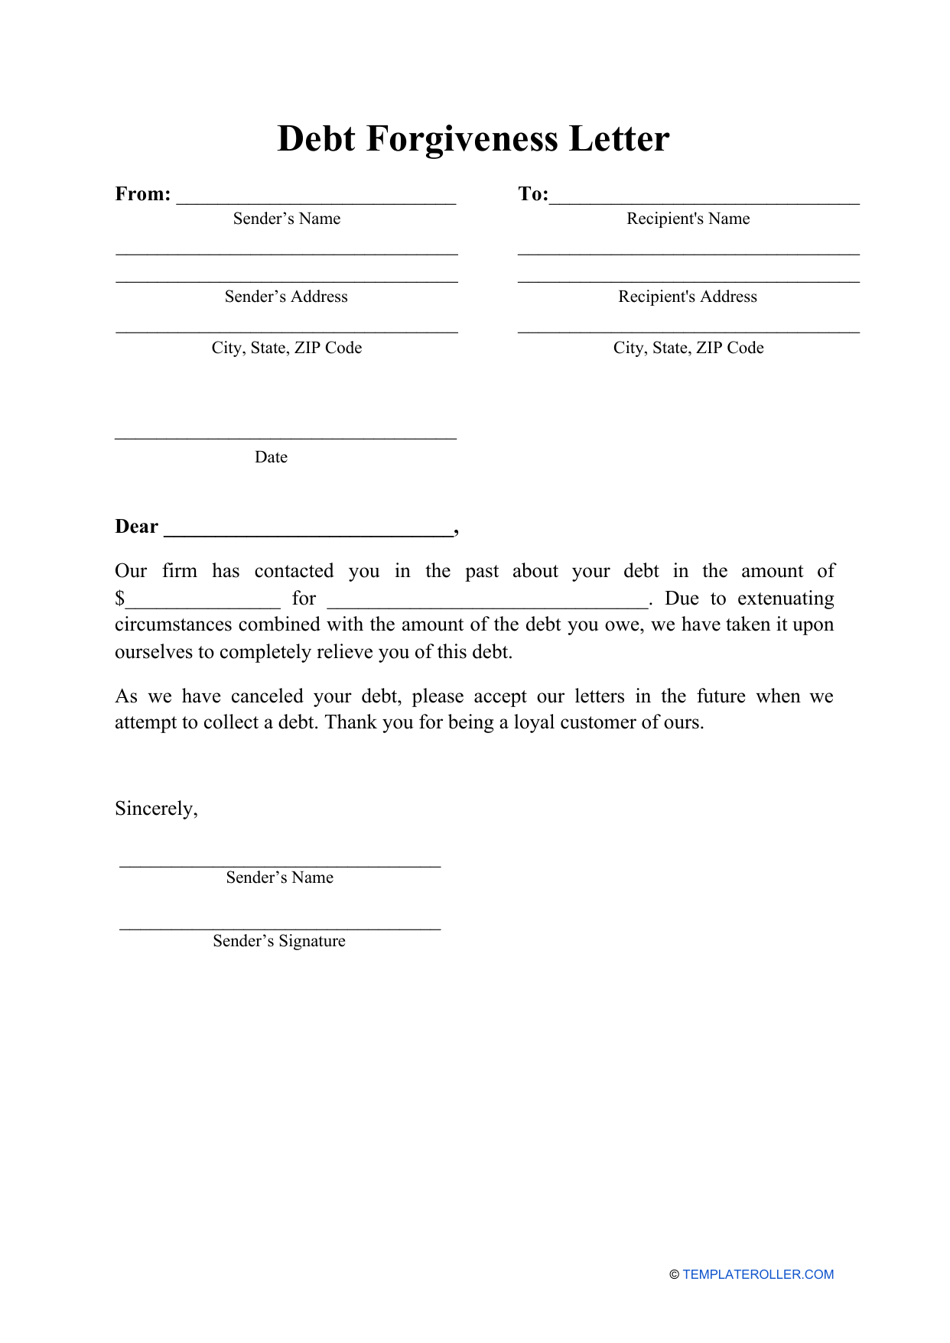 Debt Forgiveness Letter Template Preview